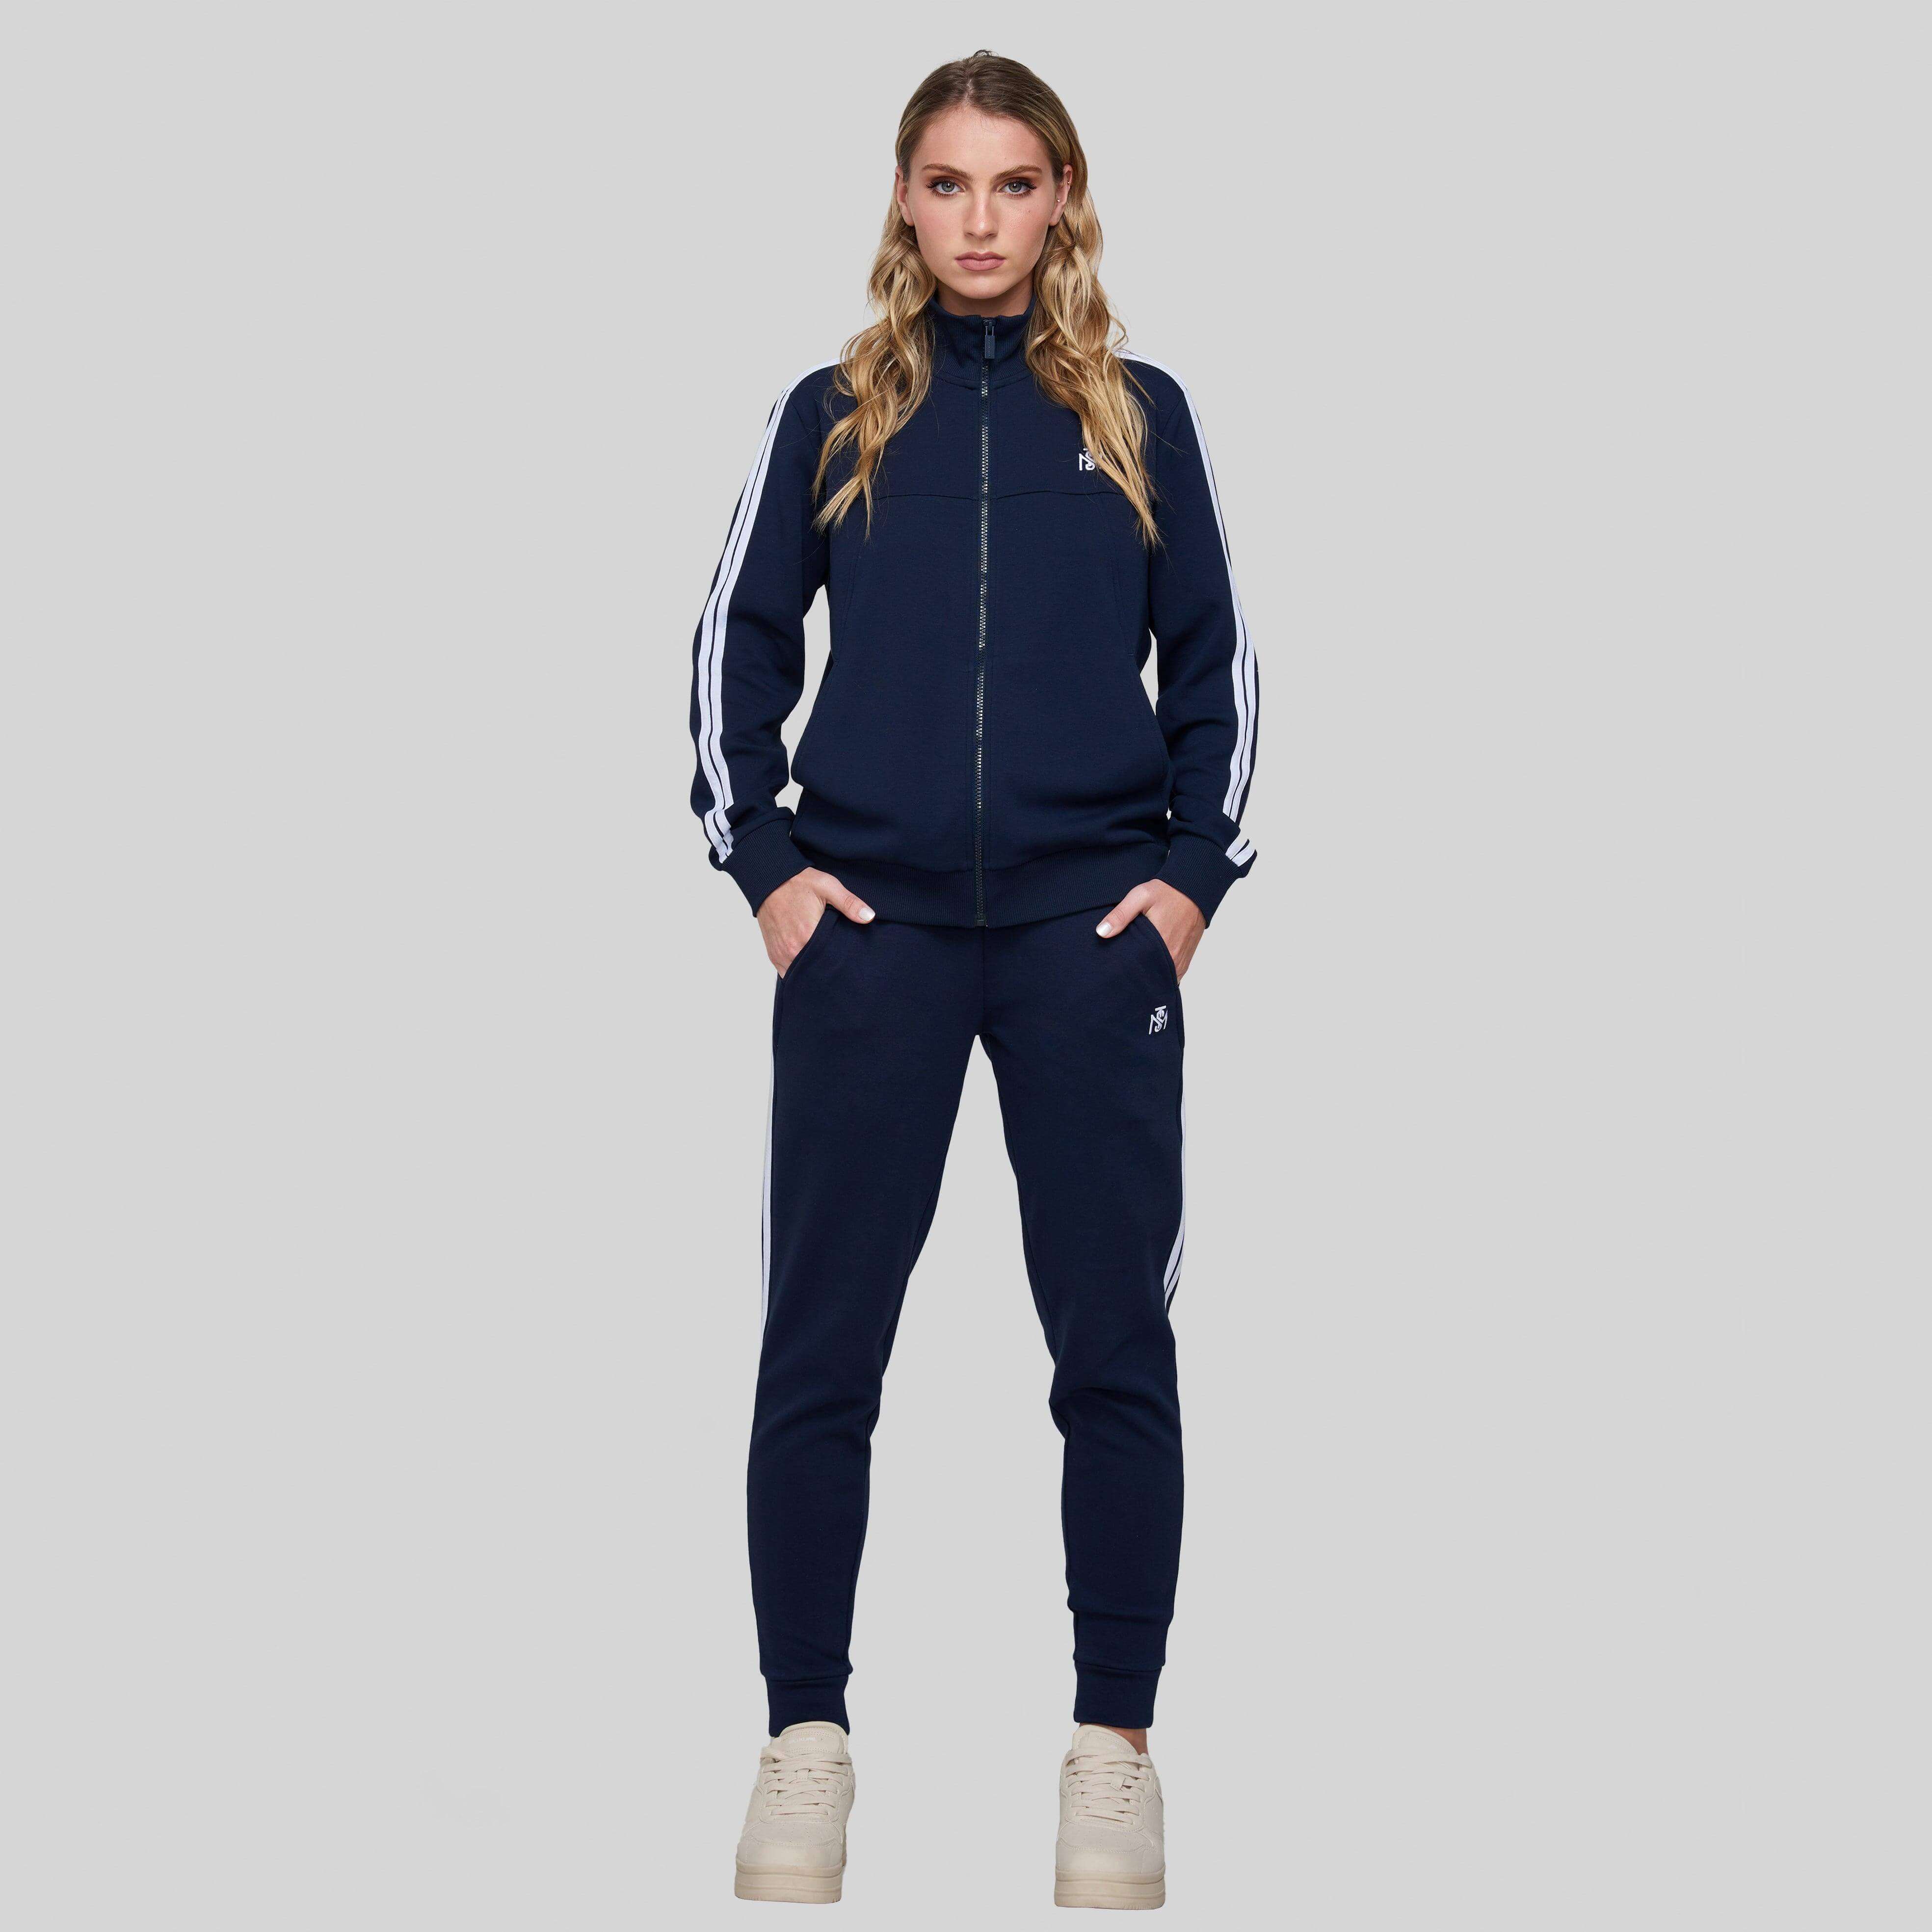 BERENICES BLUE NAVY SPORT JACKET | Monastery Couture